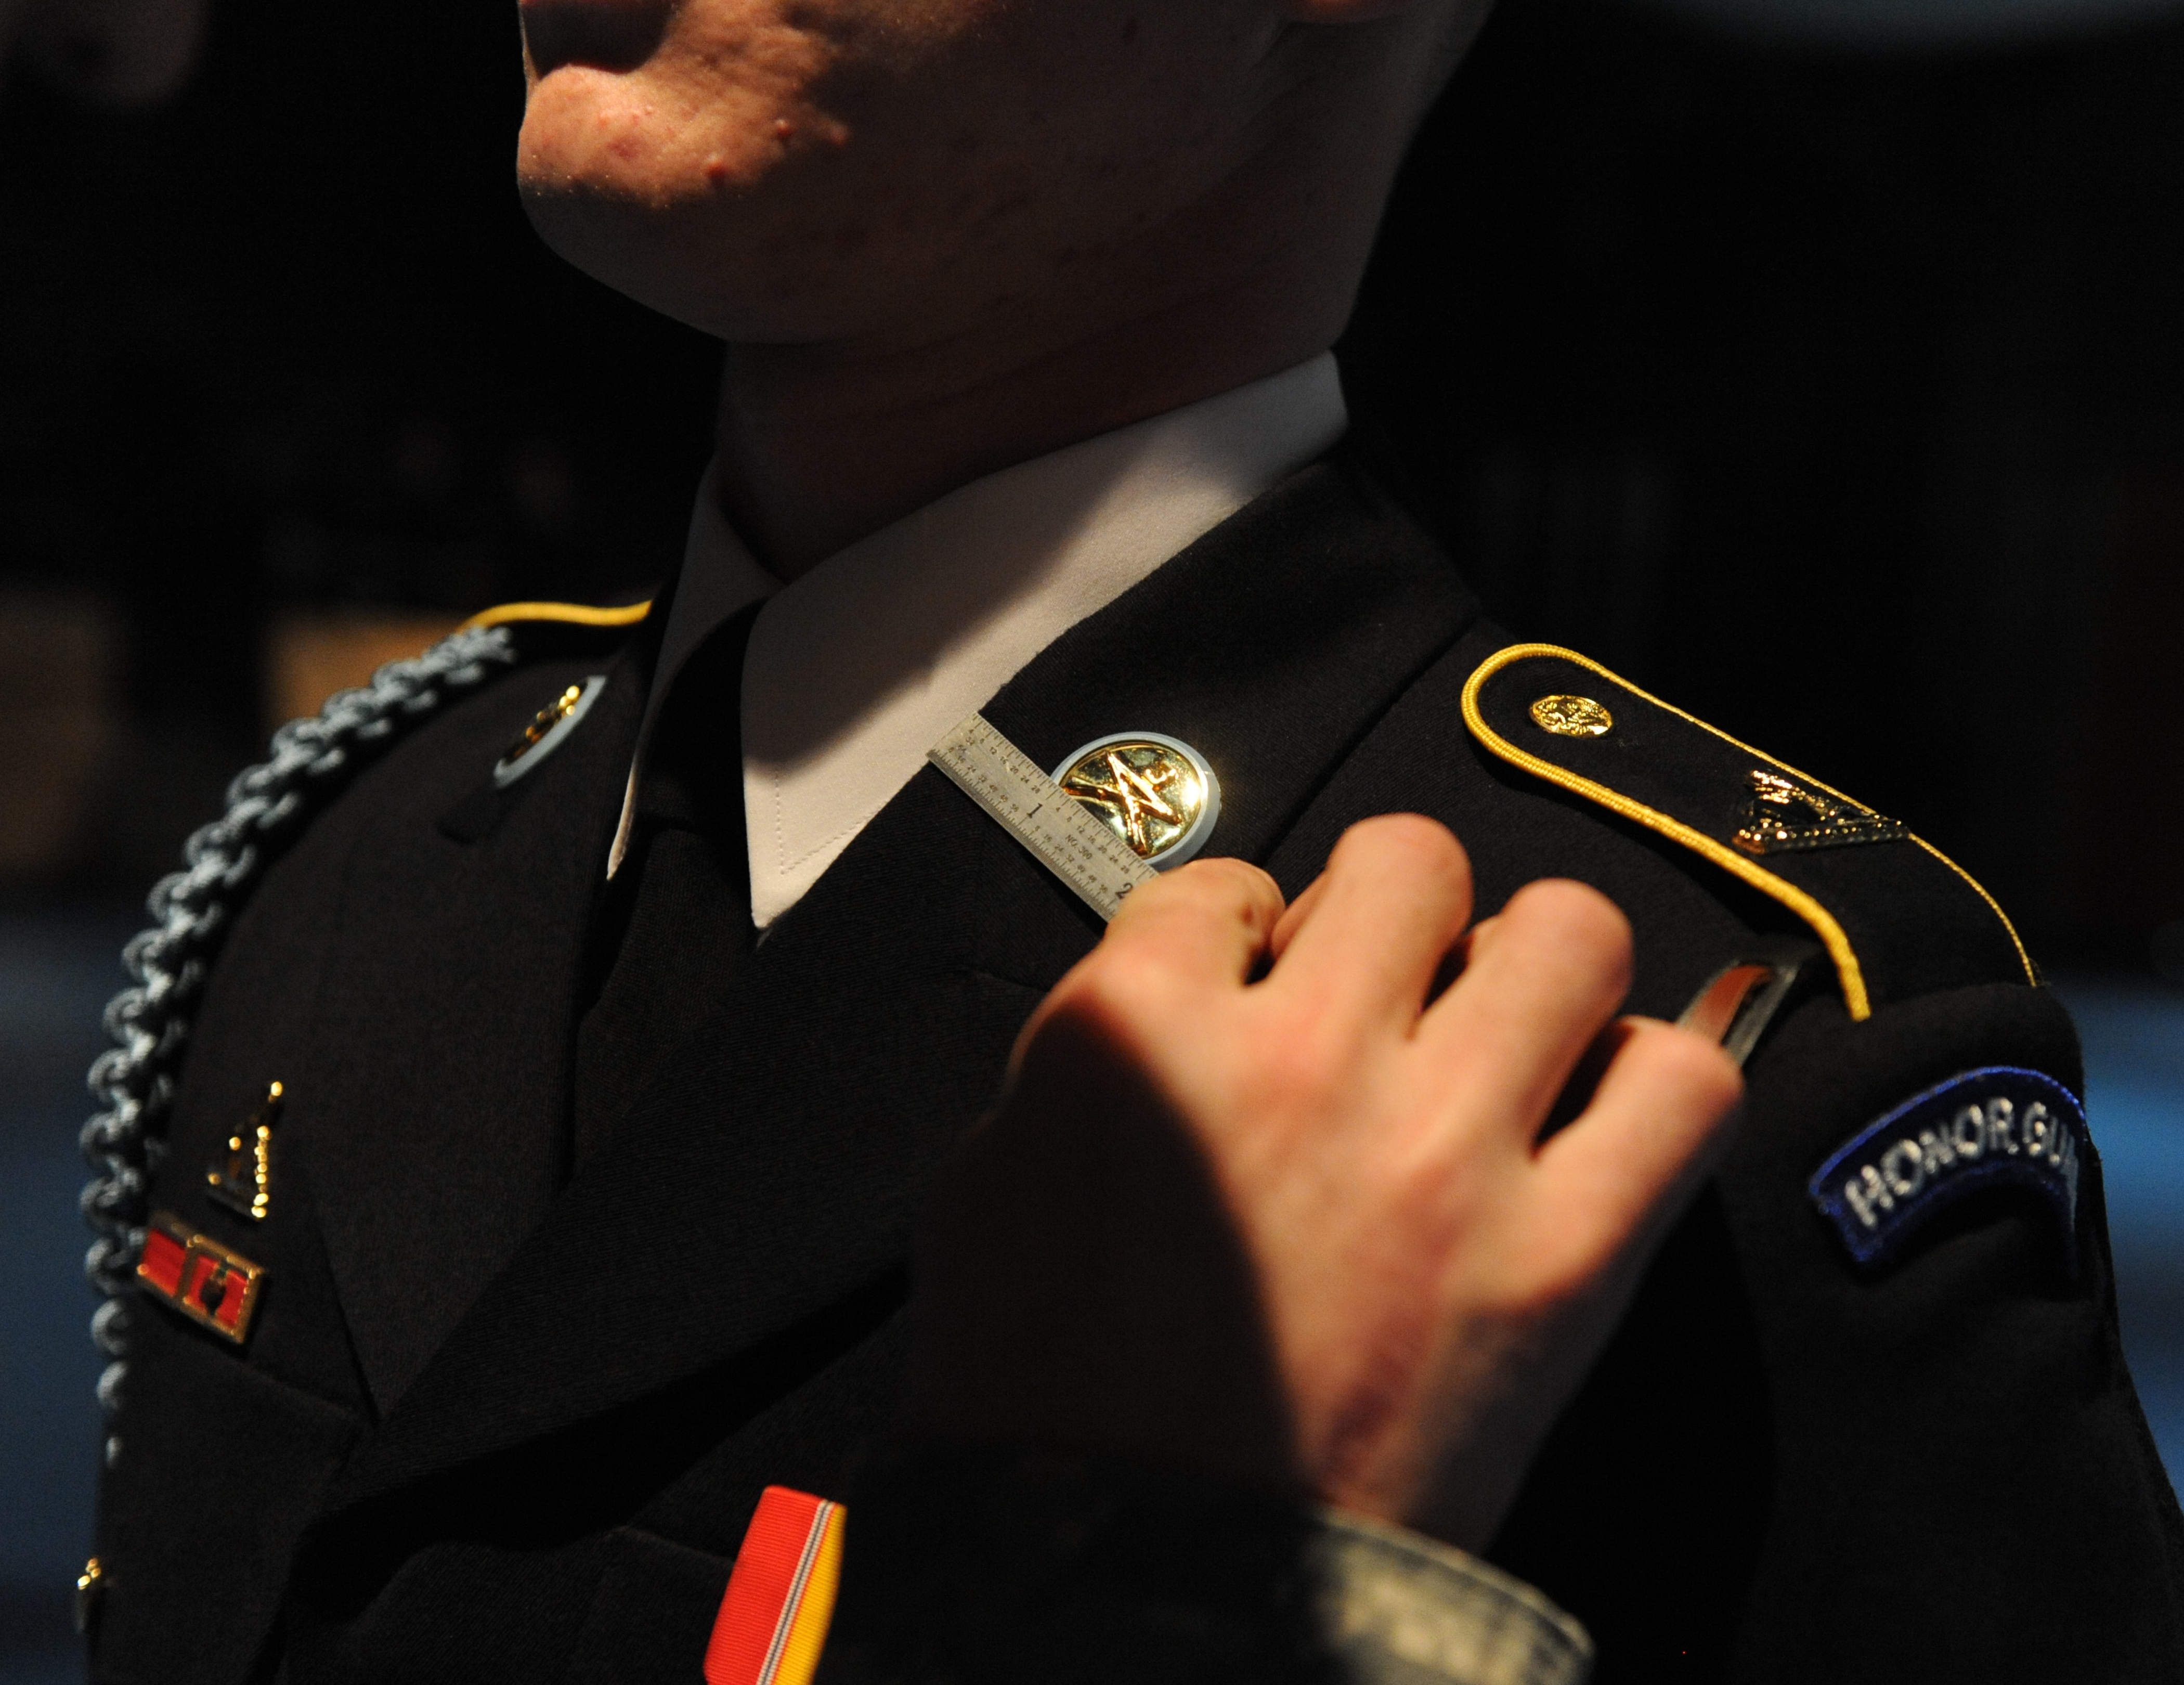 Pfc. Stephen Polidore has the details of his uniform closely scrutinized by Sgt. Jesse Levenson as members of the Old Guard who participate in funerals at Arlington Cemetery go through a semiannual refresher training in Arlington, Va., April 8, 2010.